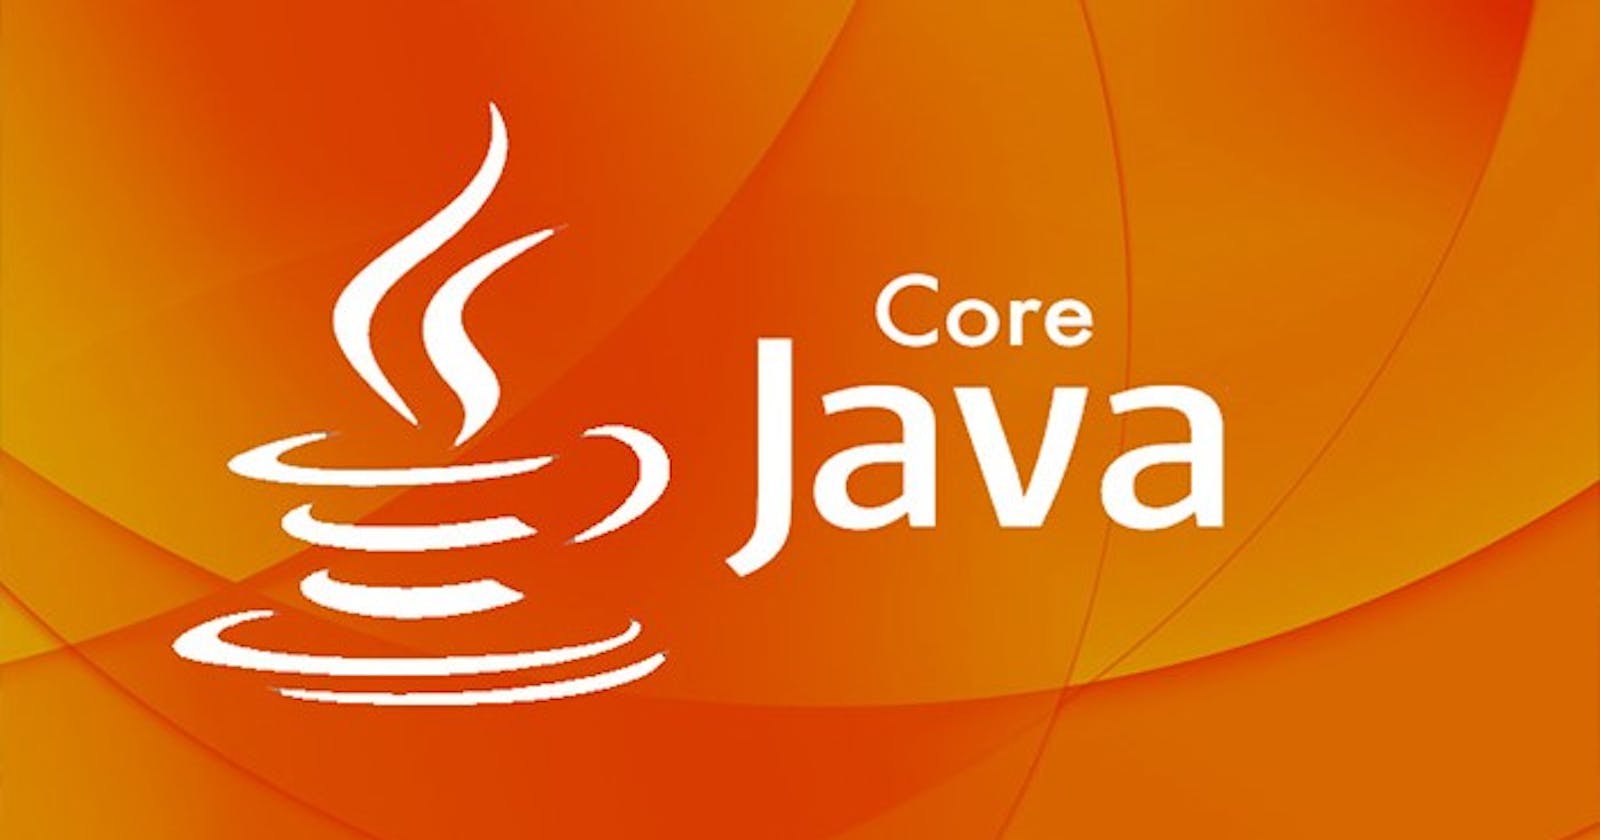 Introduction of JAVA